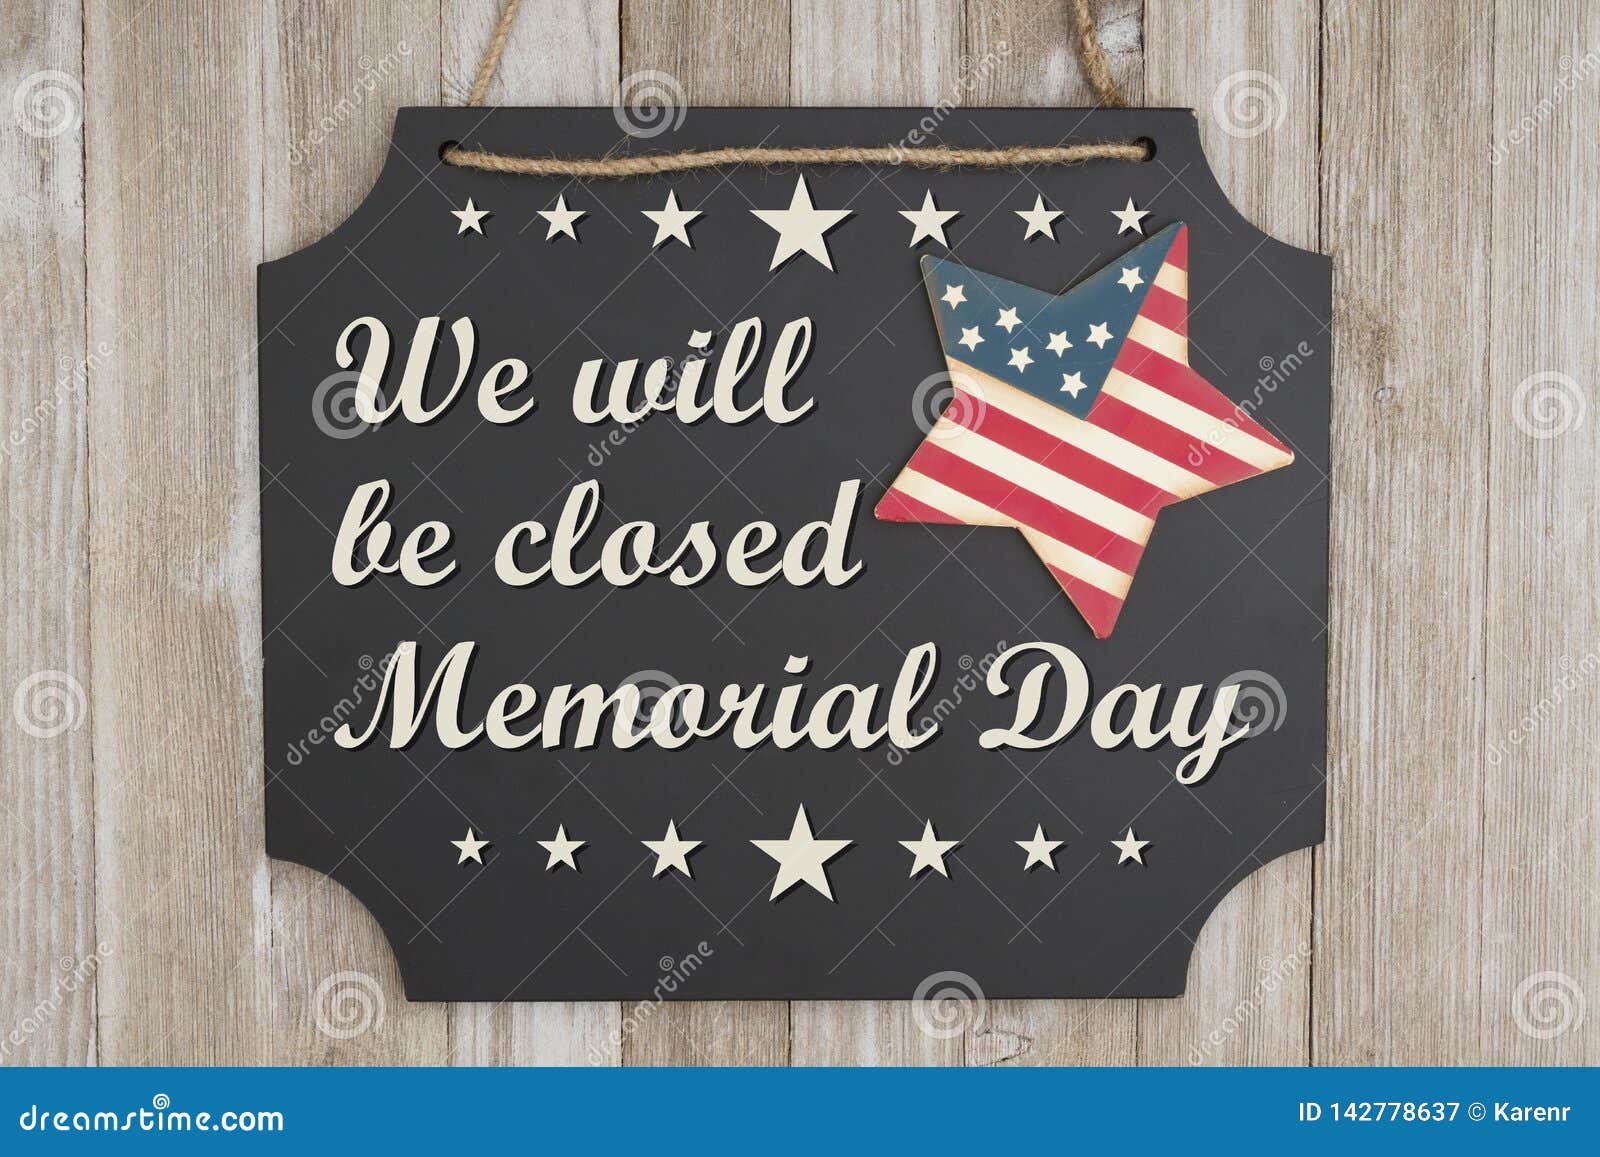 we will be closed memorial day message